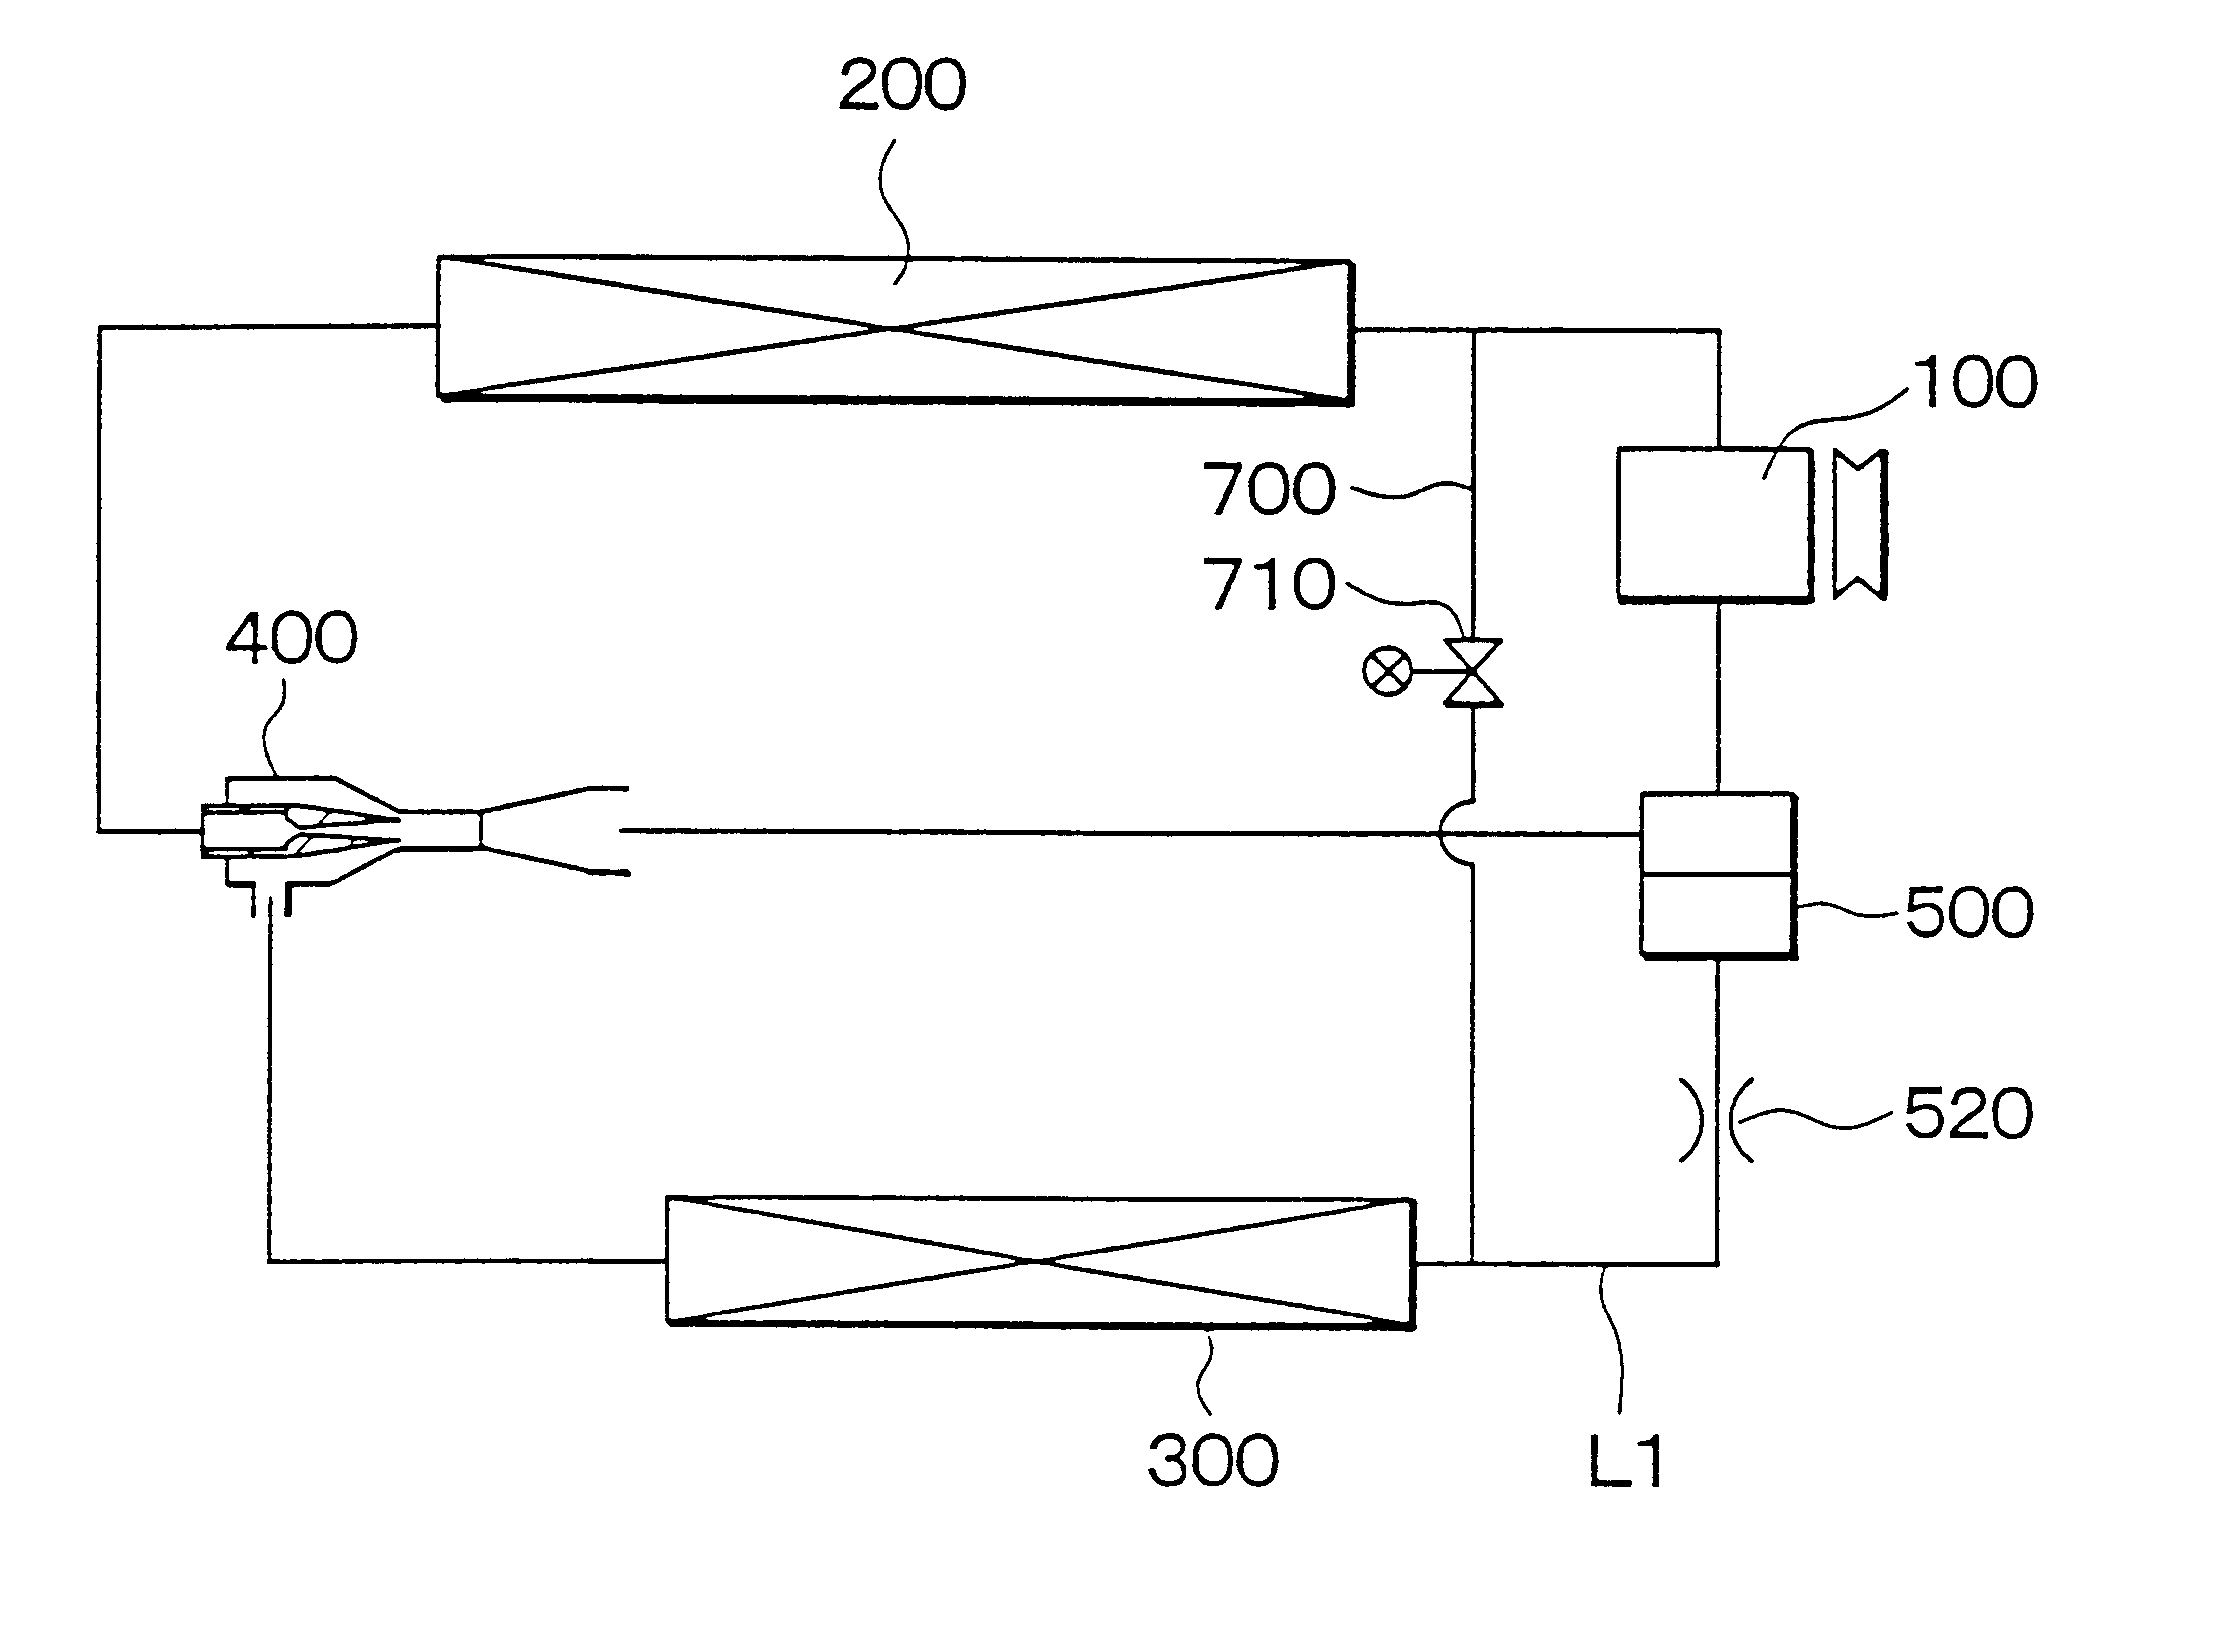 Ejector cycle system